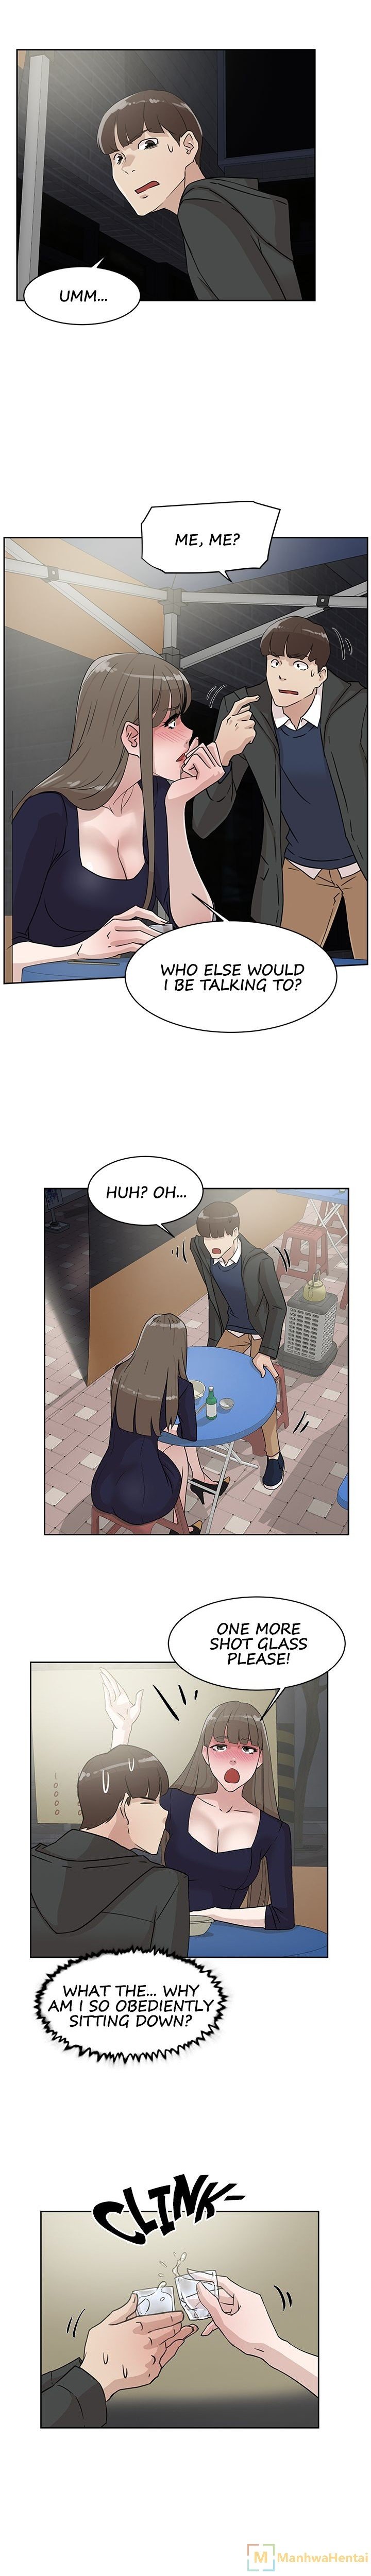 office-affairs-chap-30-12